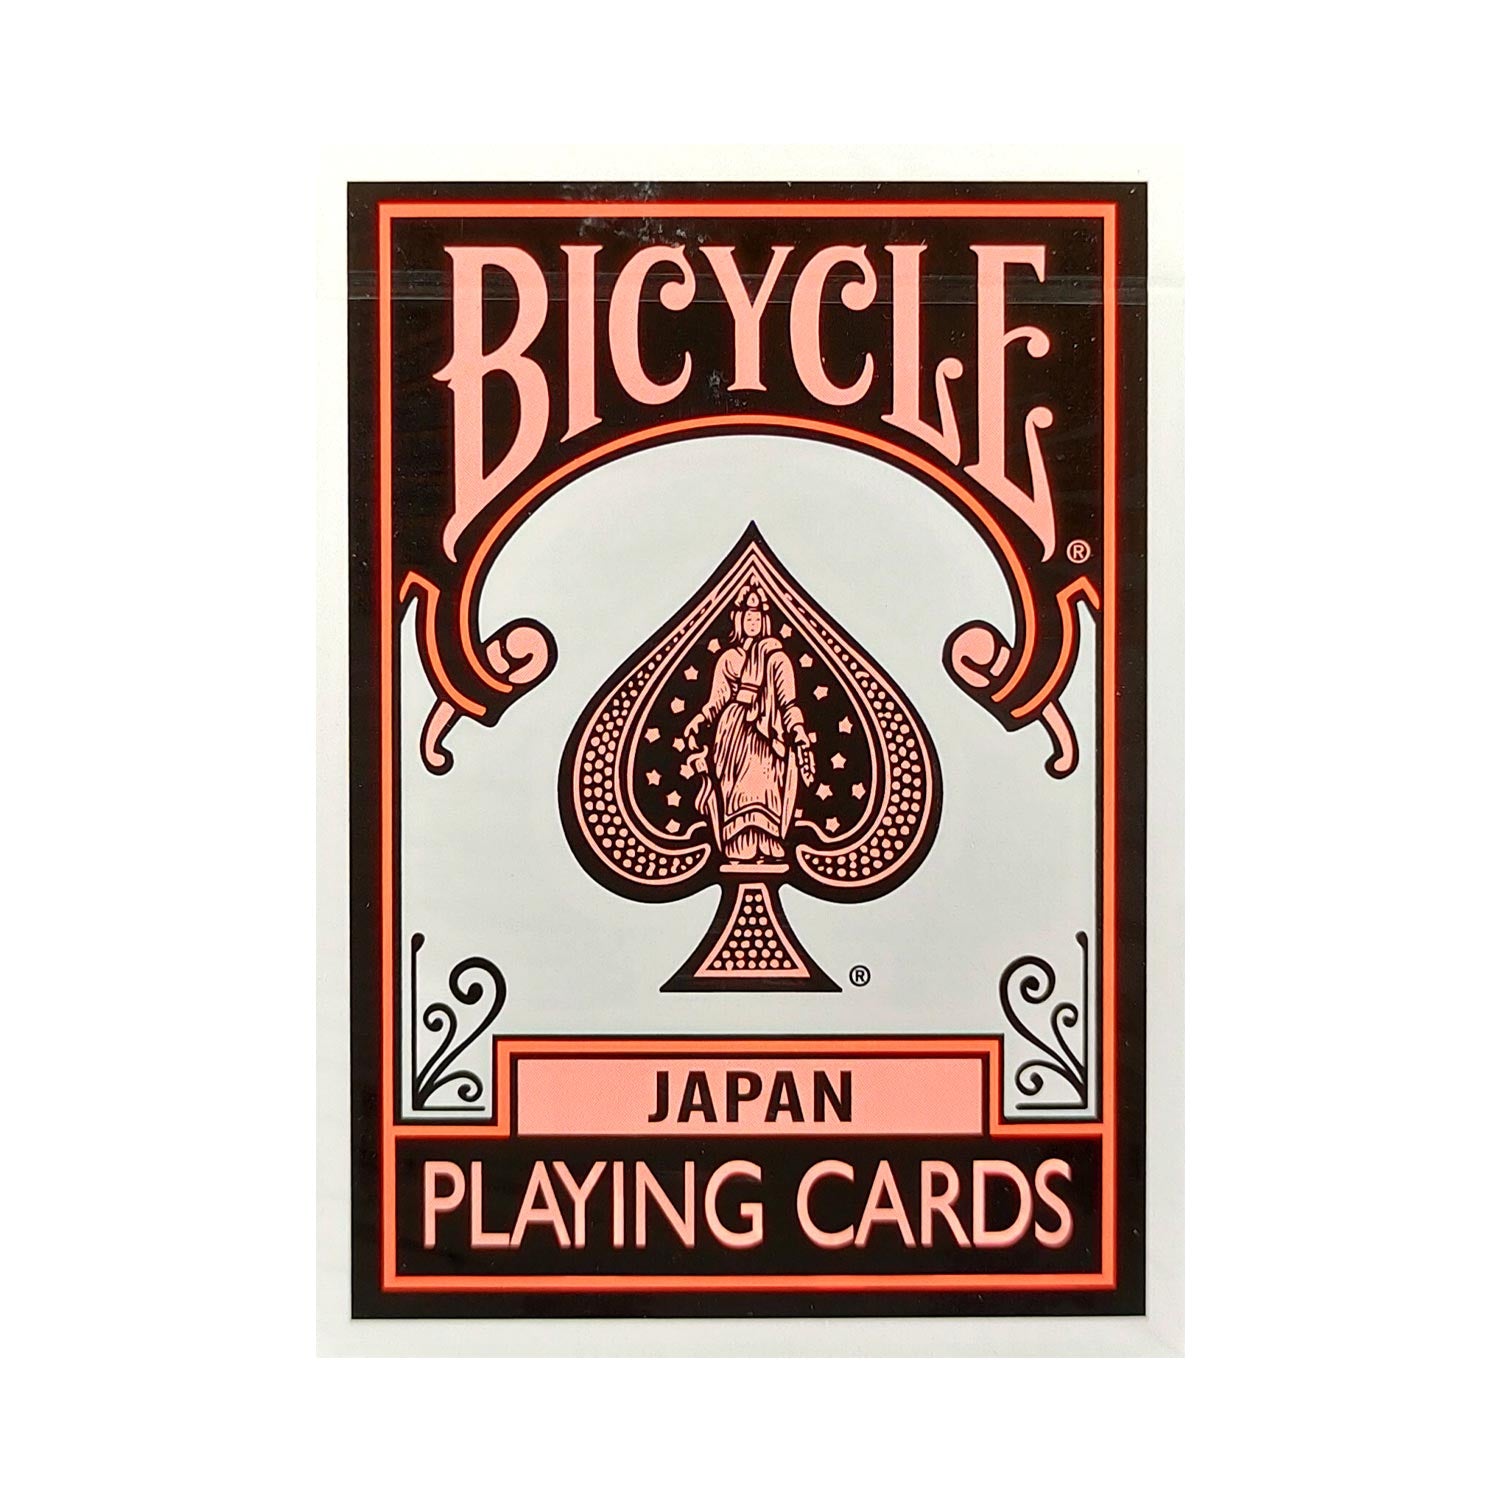 Bicycle Hello Kitty 50th Anniversary Red Playing Cards Sanrio Hello Kitty  was born in the suburbs of London. She lives with her parents